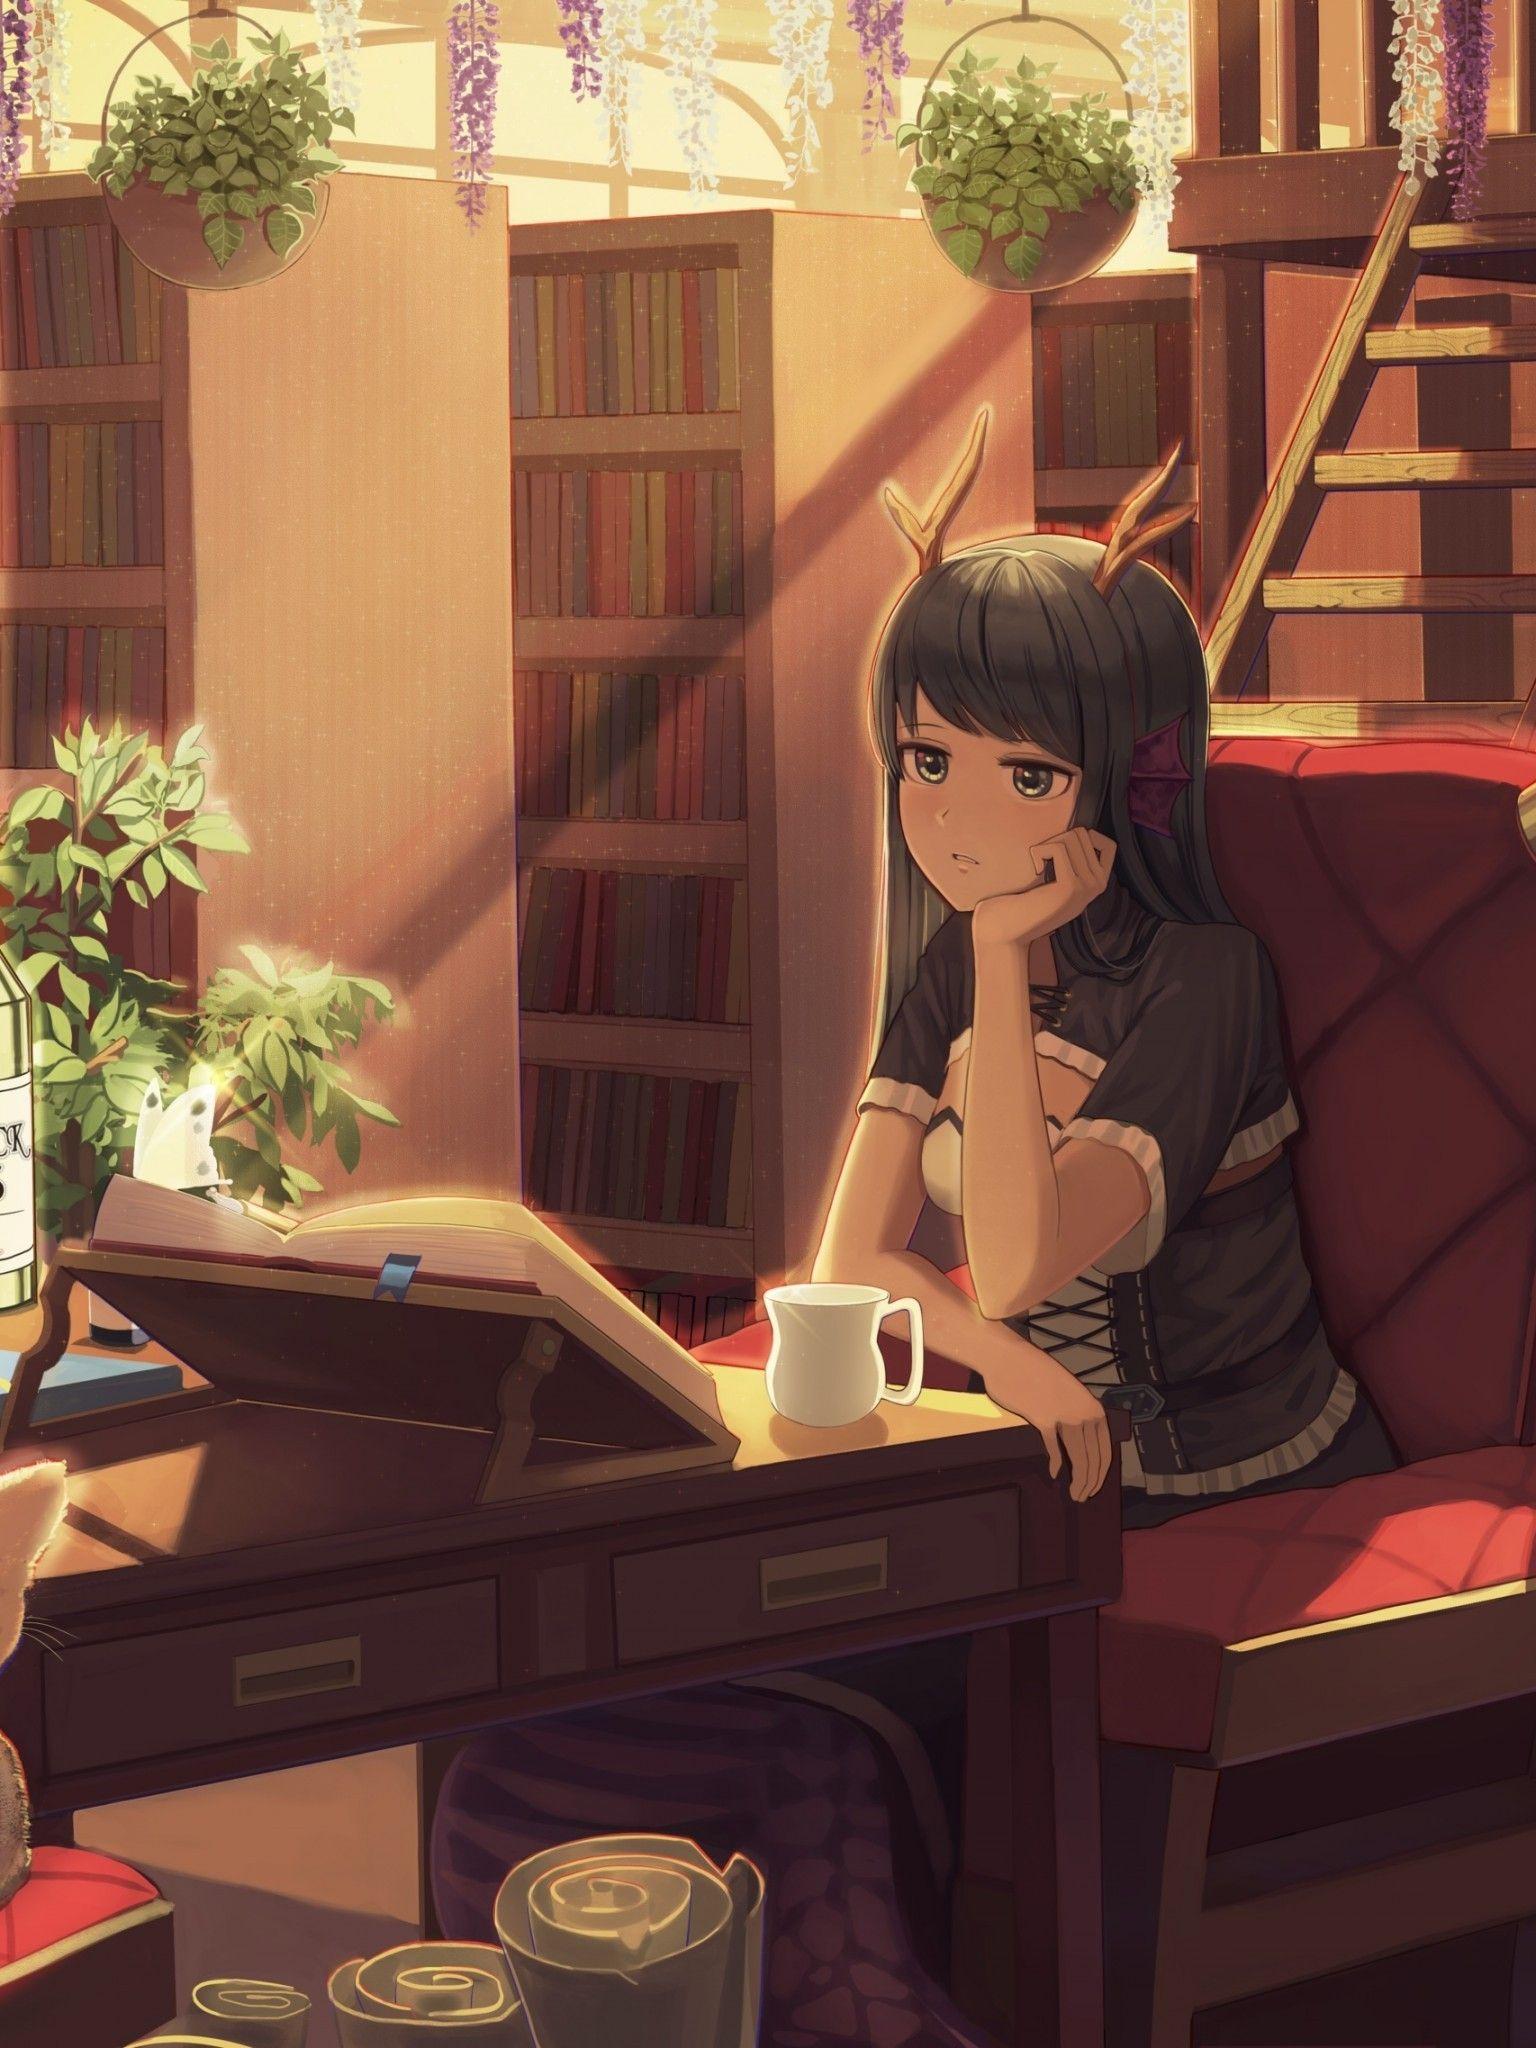 327991 Anime Girl Studying Student Uniform Cute Cat 4k  Rare  Gallery HD Wallpapers